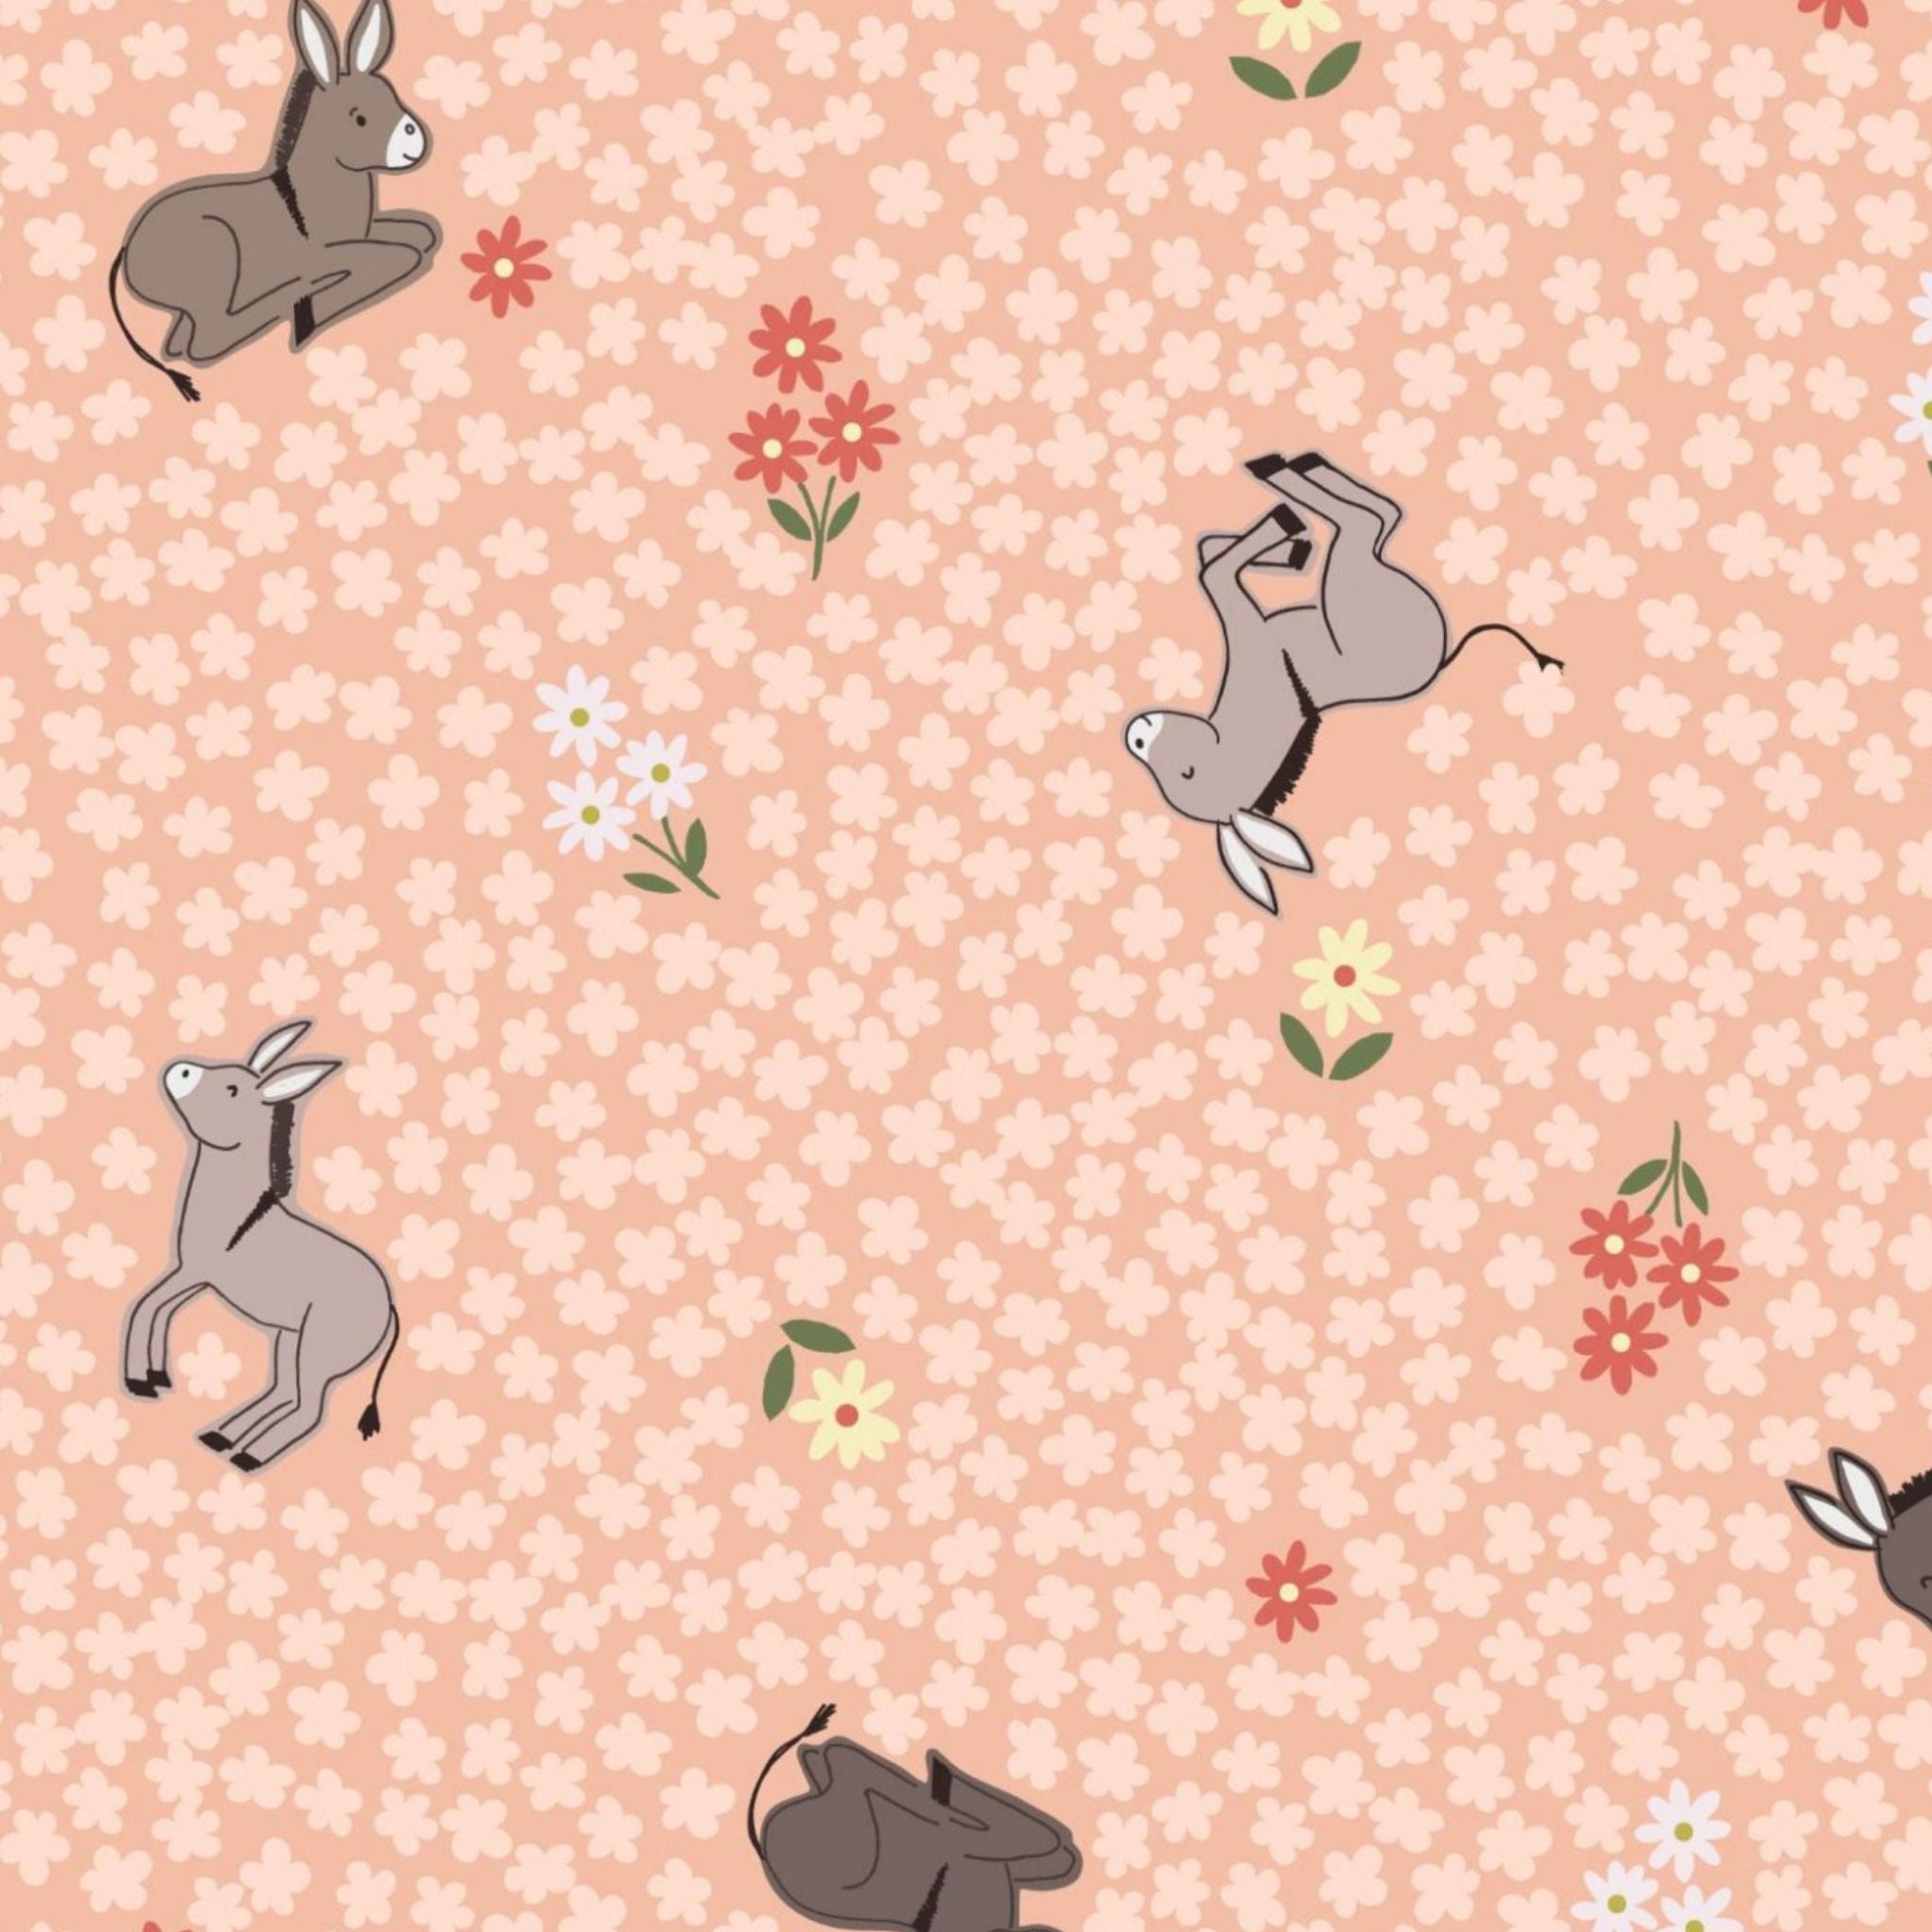 donkeys on floral peach cotton fabric - Piggy Tales by Lewis and Irene